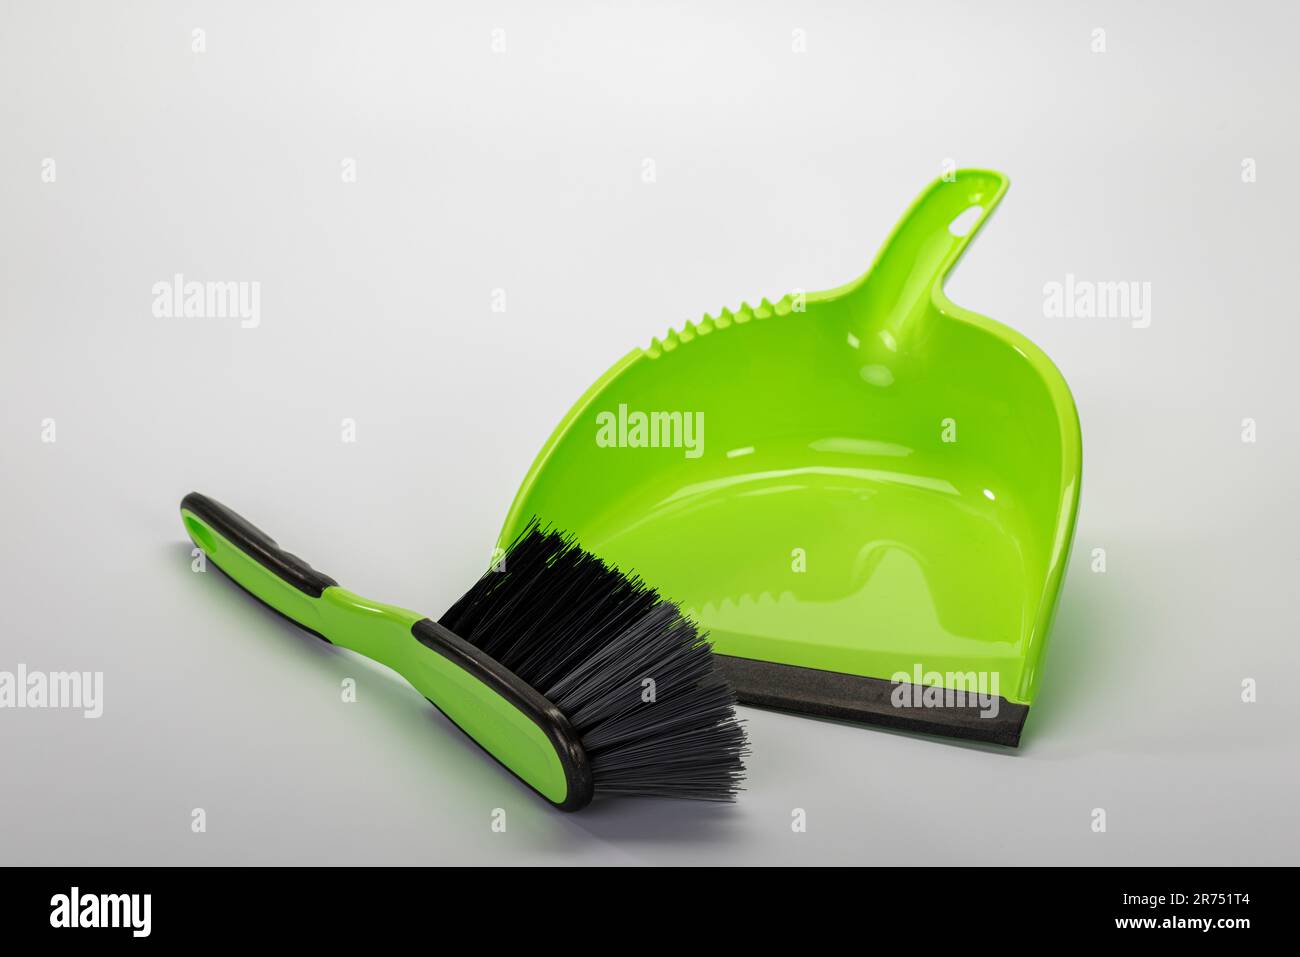 Sweeping set, green, hand brush and dustpan, white background, Stock Photo